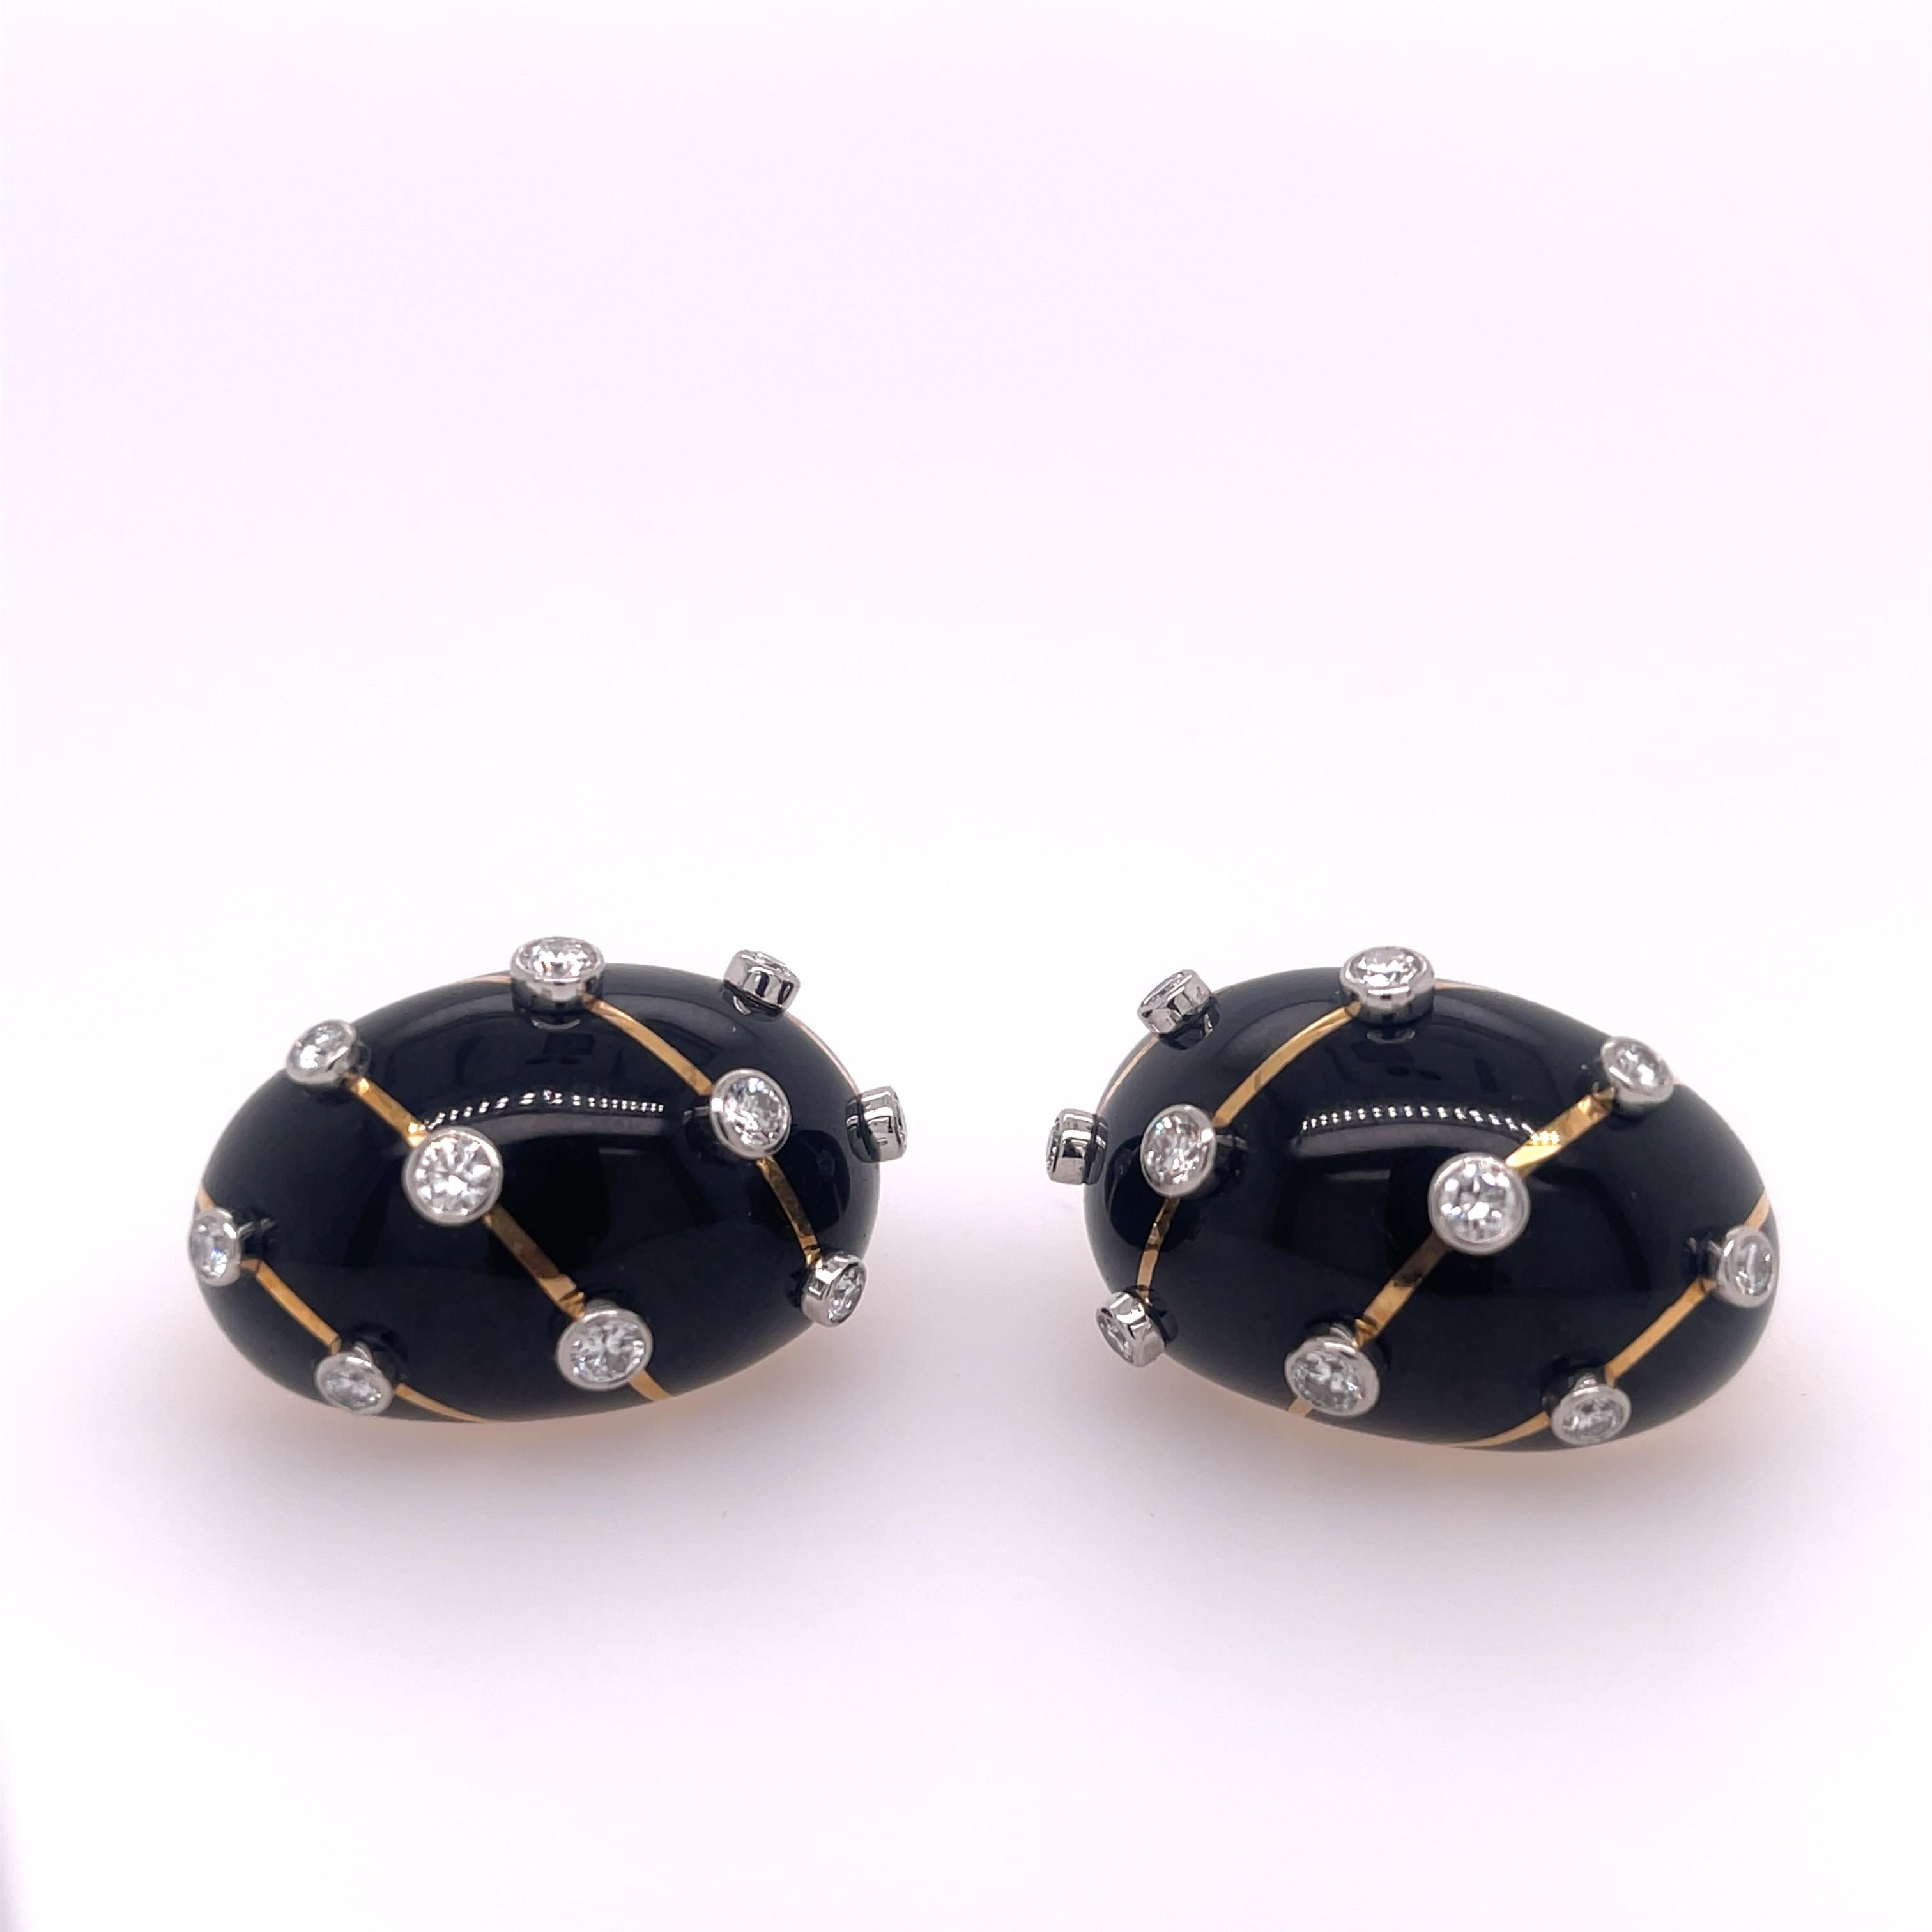 Schlumberger for Tiffany & Co. Diamond and Black Enamel Earrings. Stamped France AU750 PT950 Tiffany & Co Schlumberger STD.